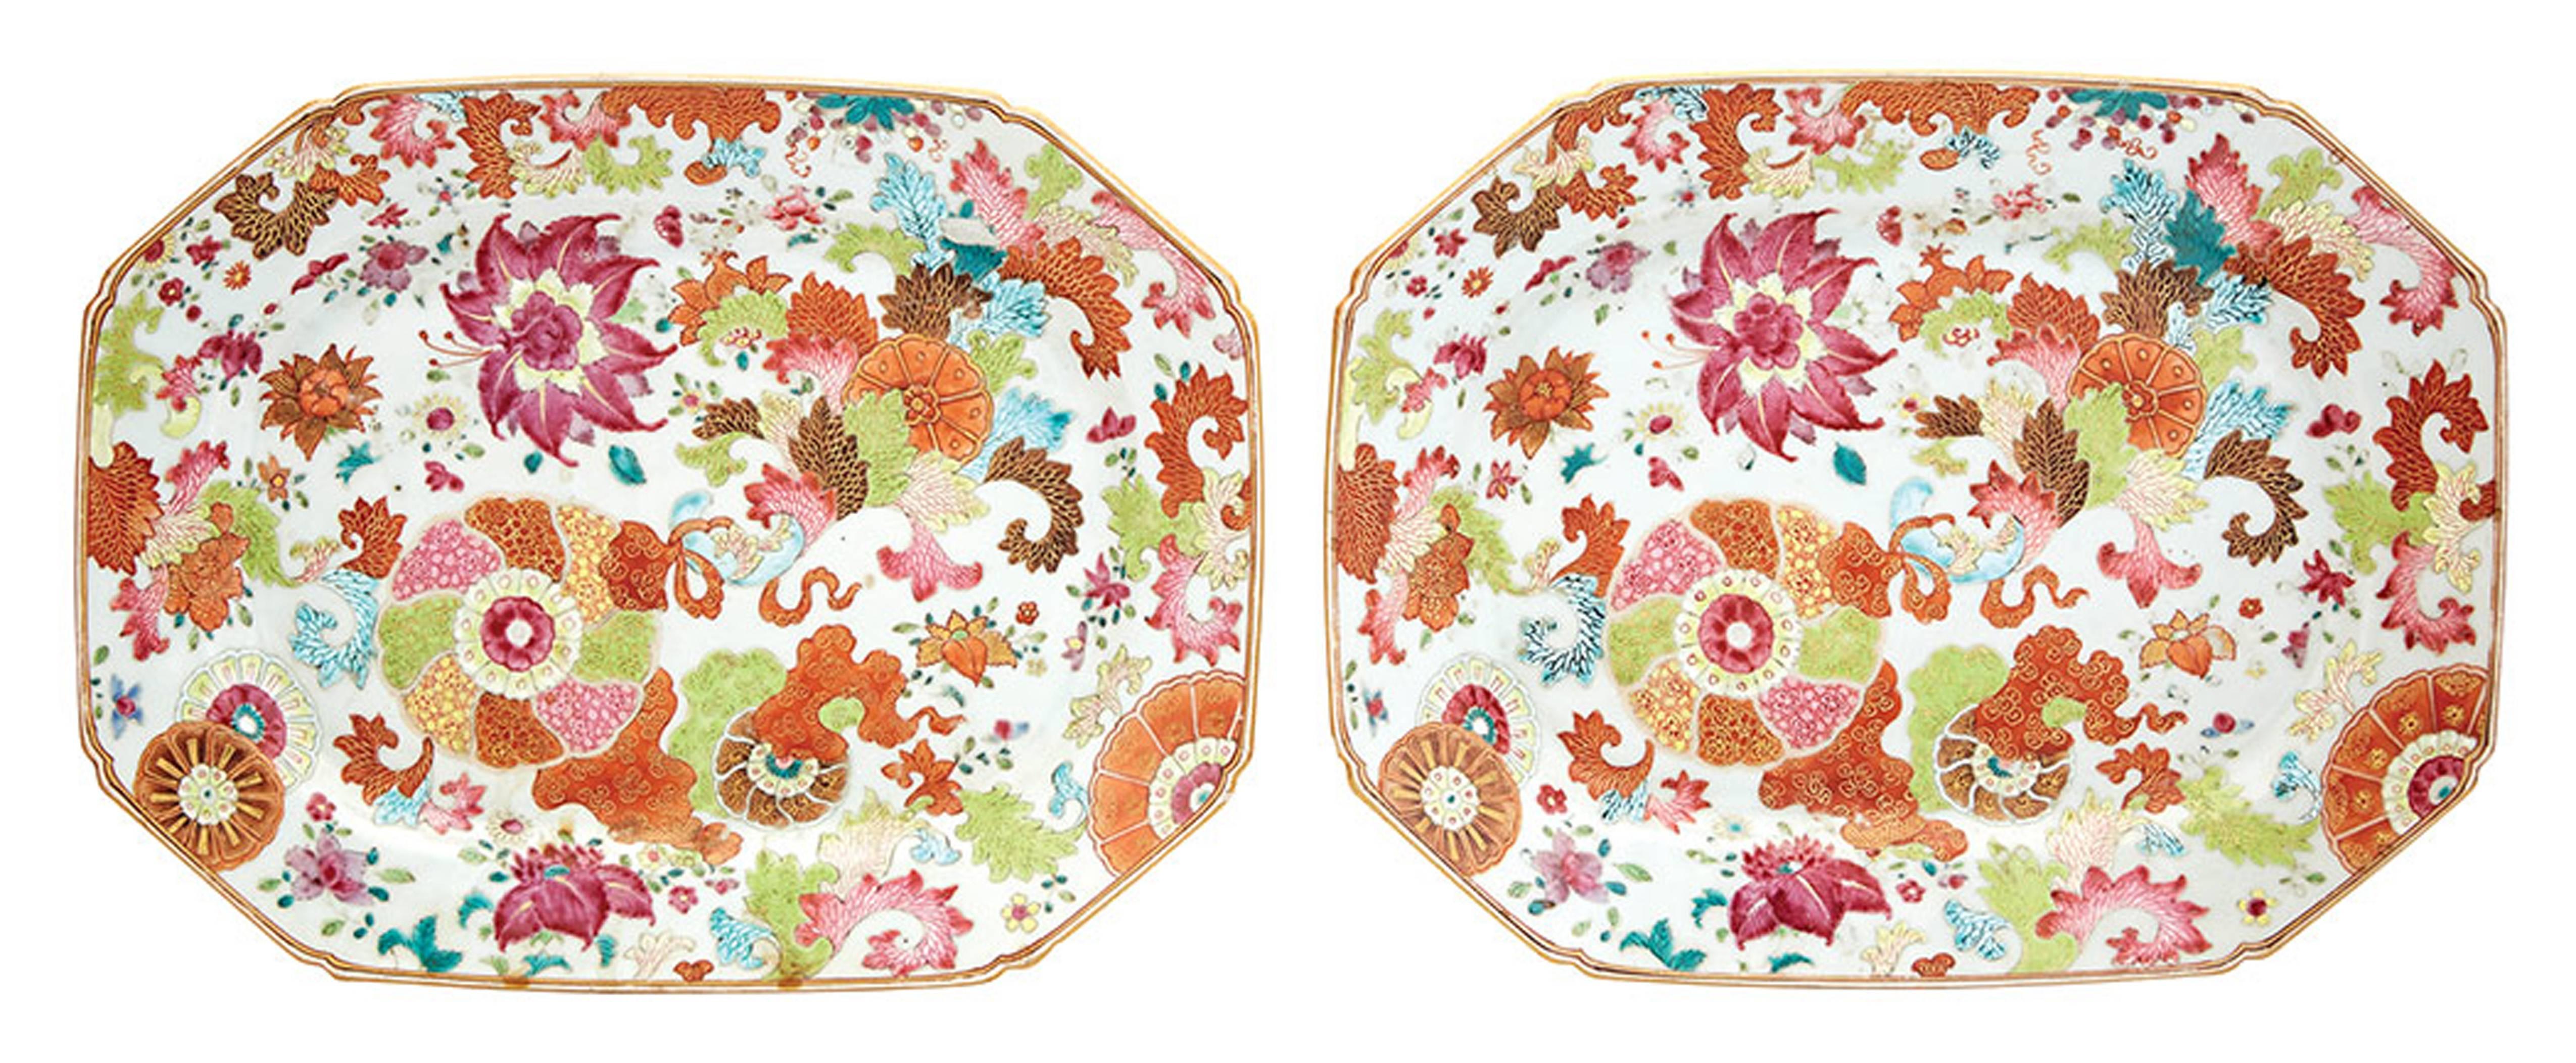 Chinese Export porcelain tobacco leaf pair of dishes, 
circa 1765-1775.

The pair of large Chinese Export canted-corned rectangular porcelain dishes is painted with a variation of the tobacco leaf design.